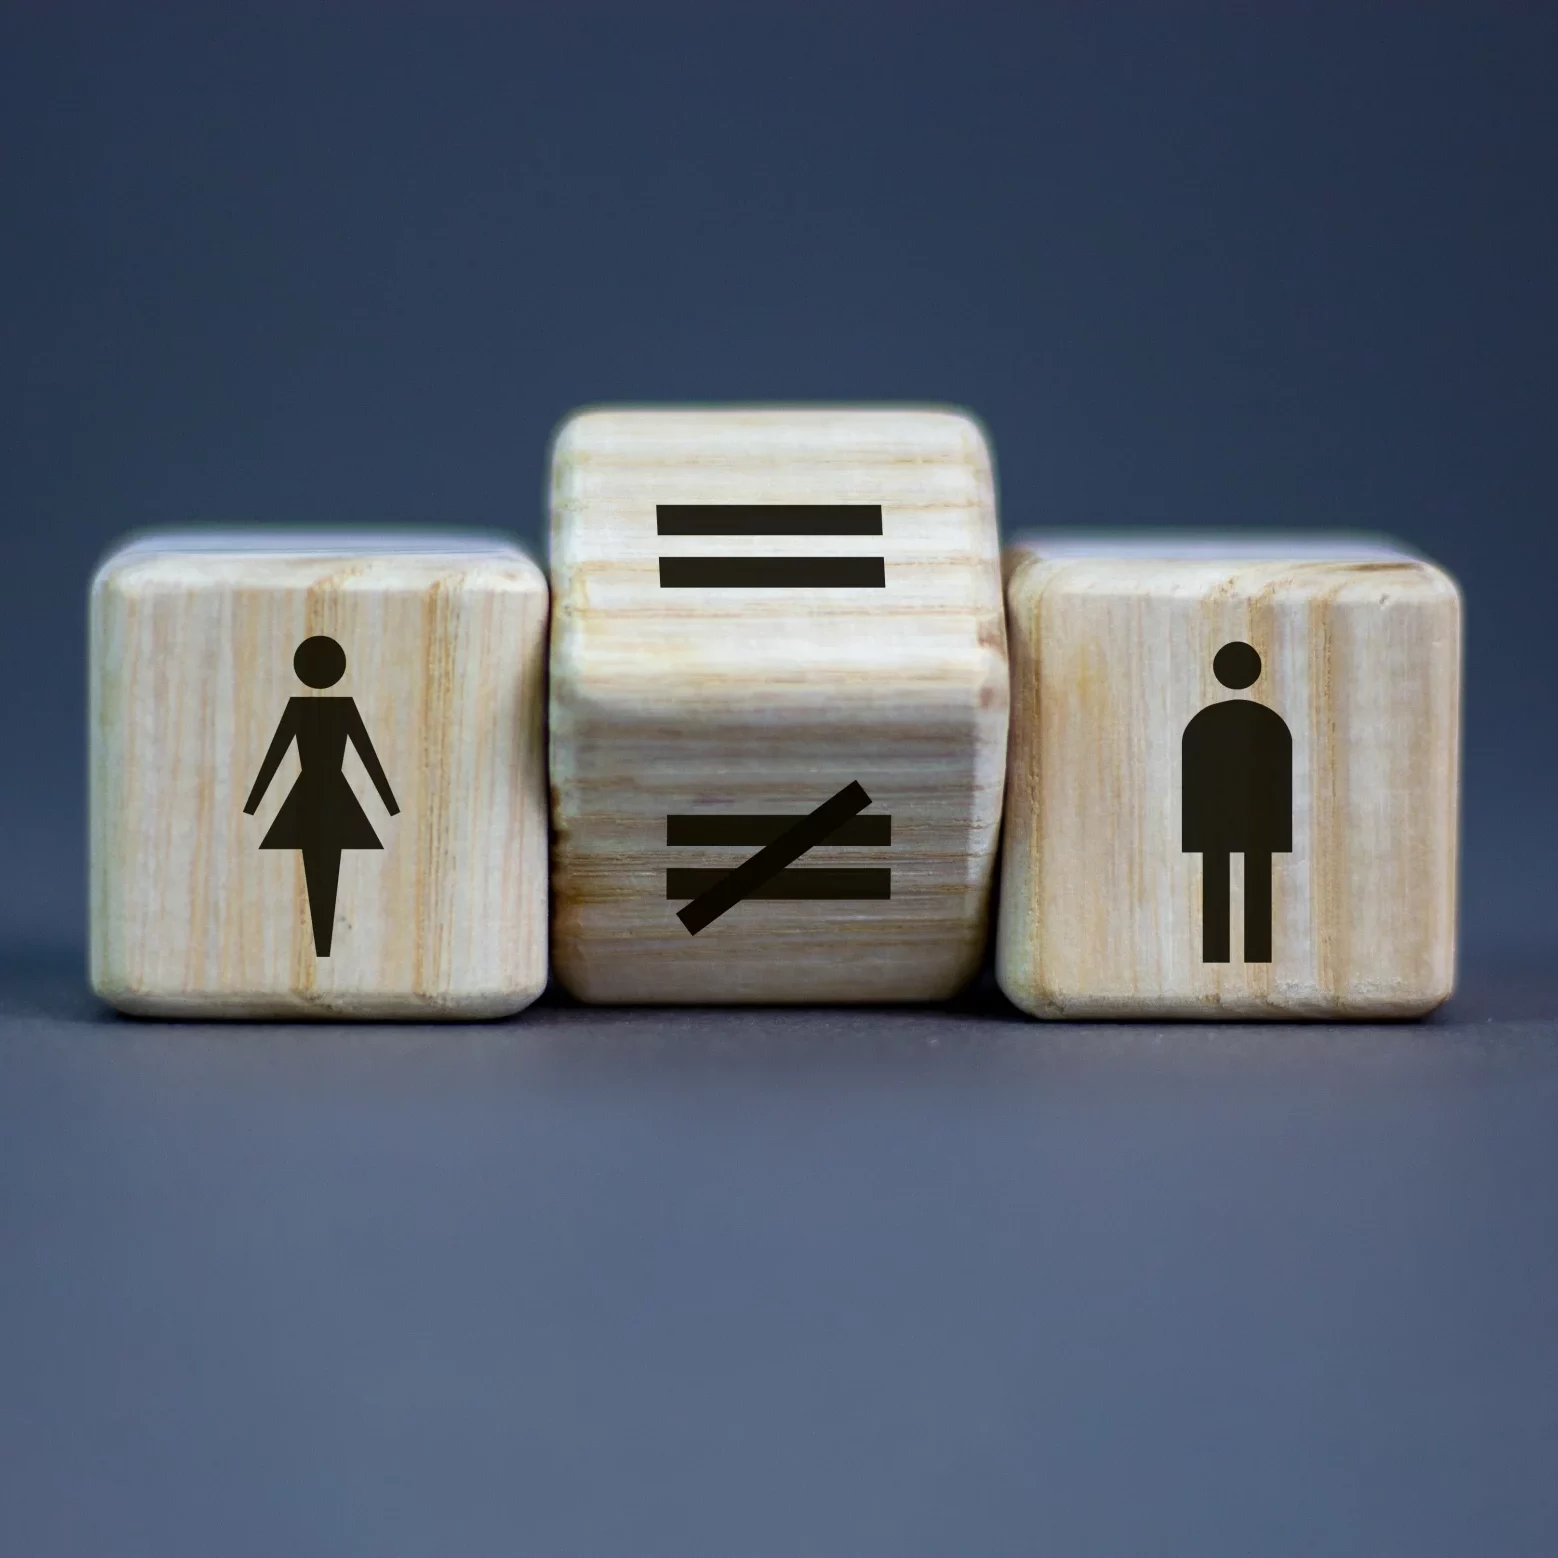 Concept photo that shows a man and a woman next to a image with the equal sign.